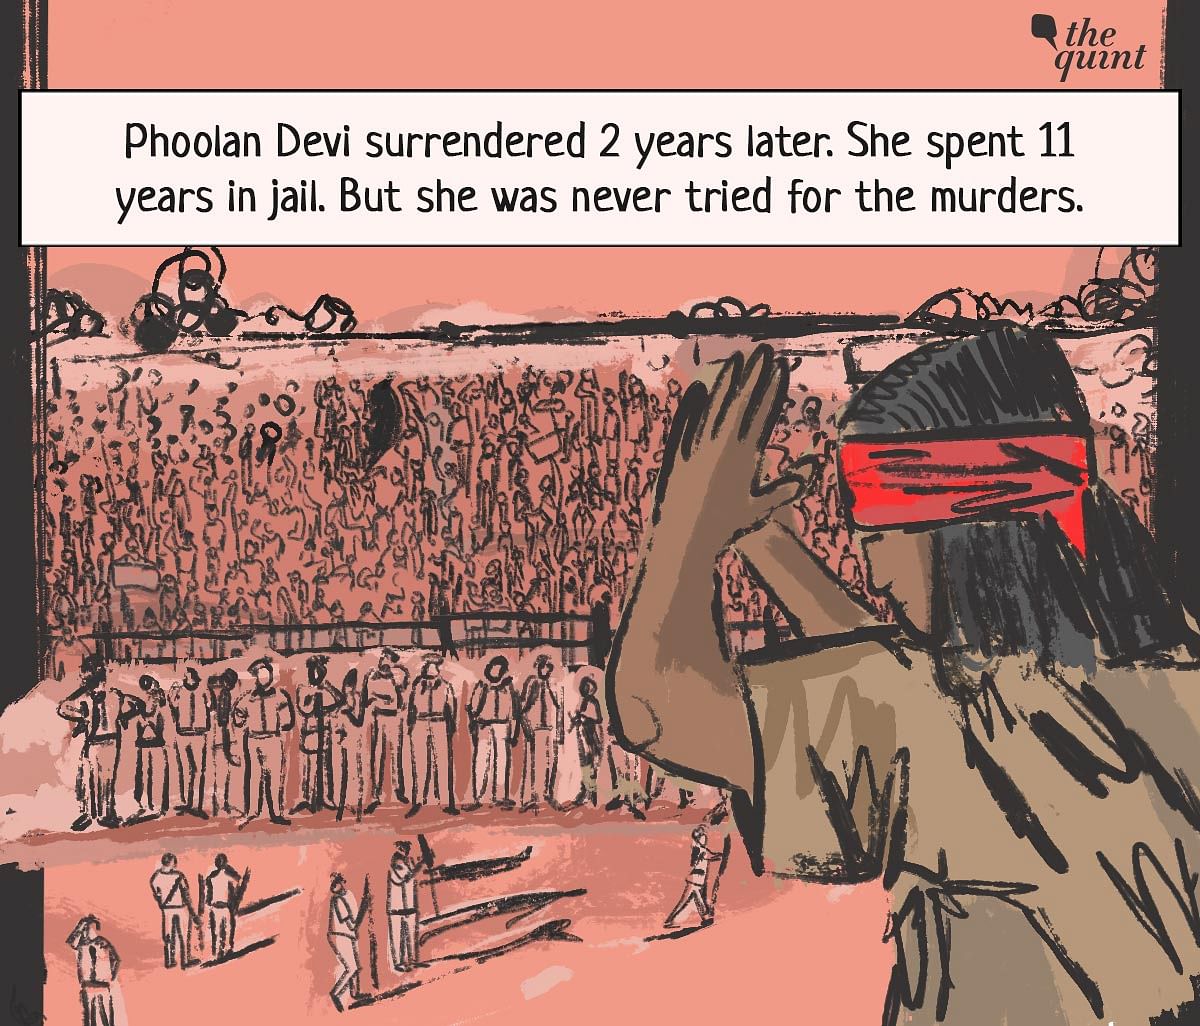 How did this highly controversial yet extraordinary woman become a feminist icon? We trace Phoolan Devi’s story.